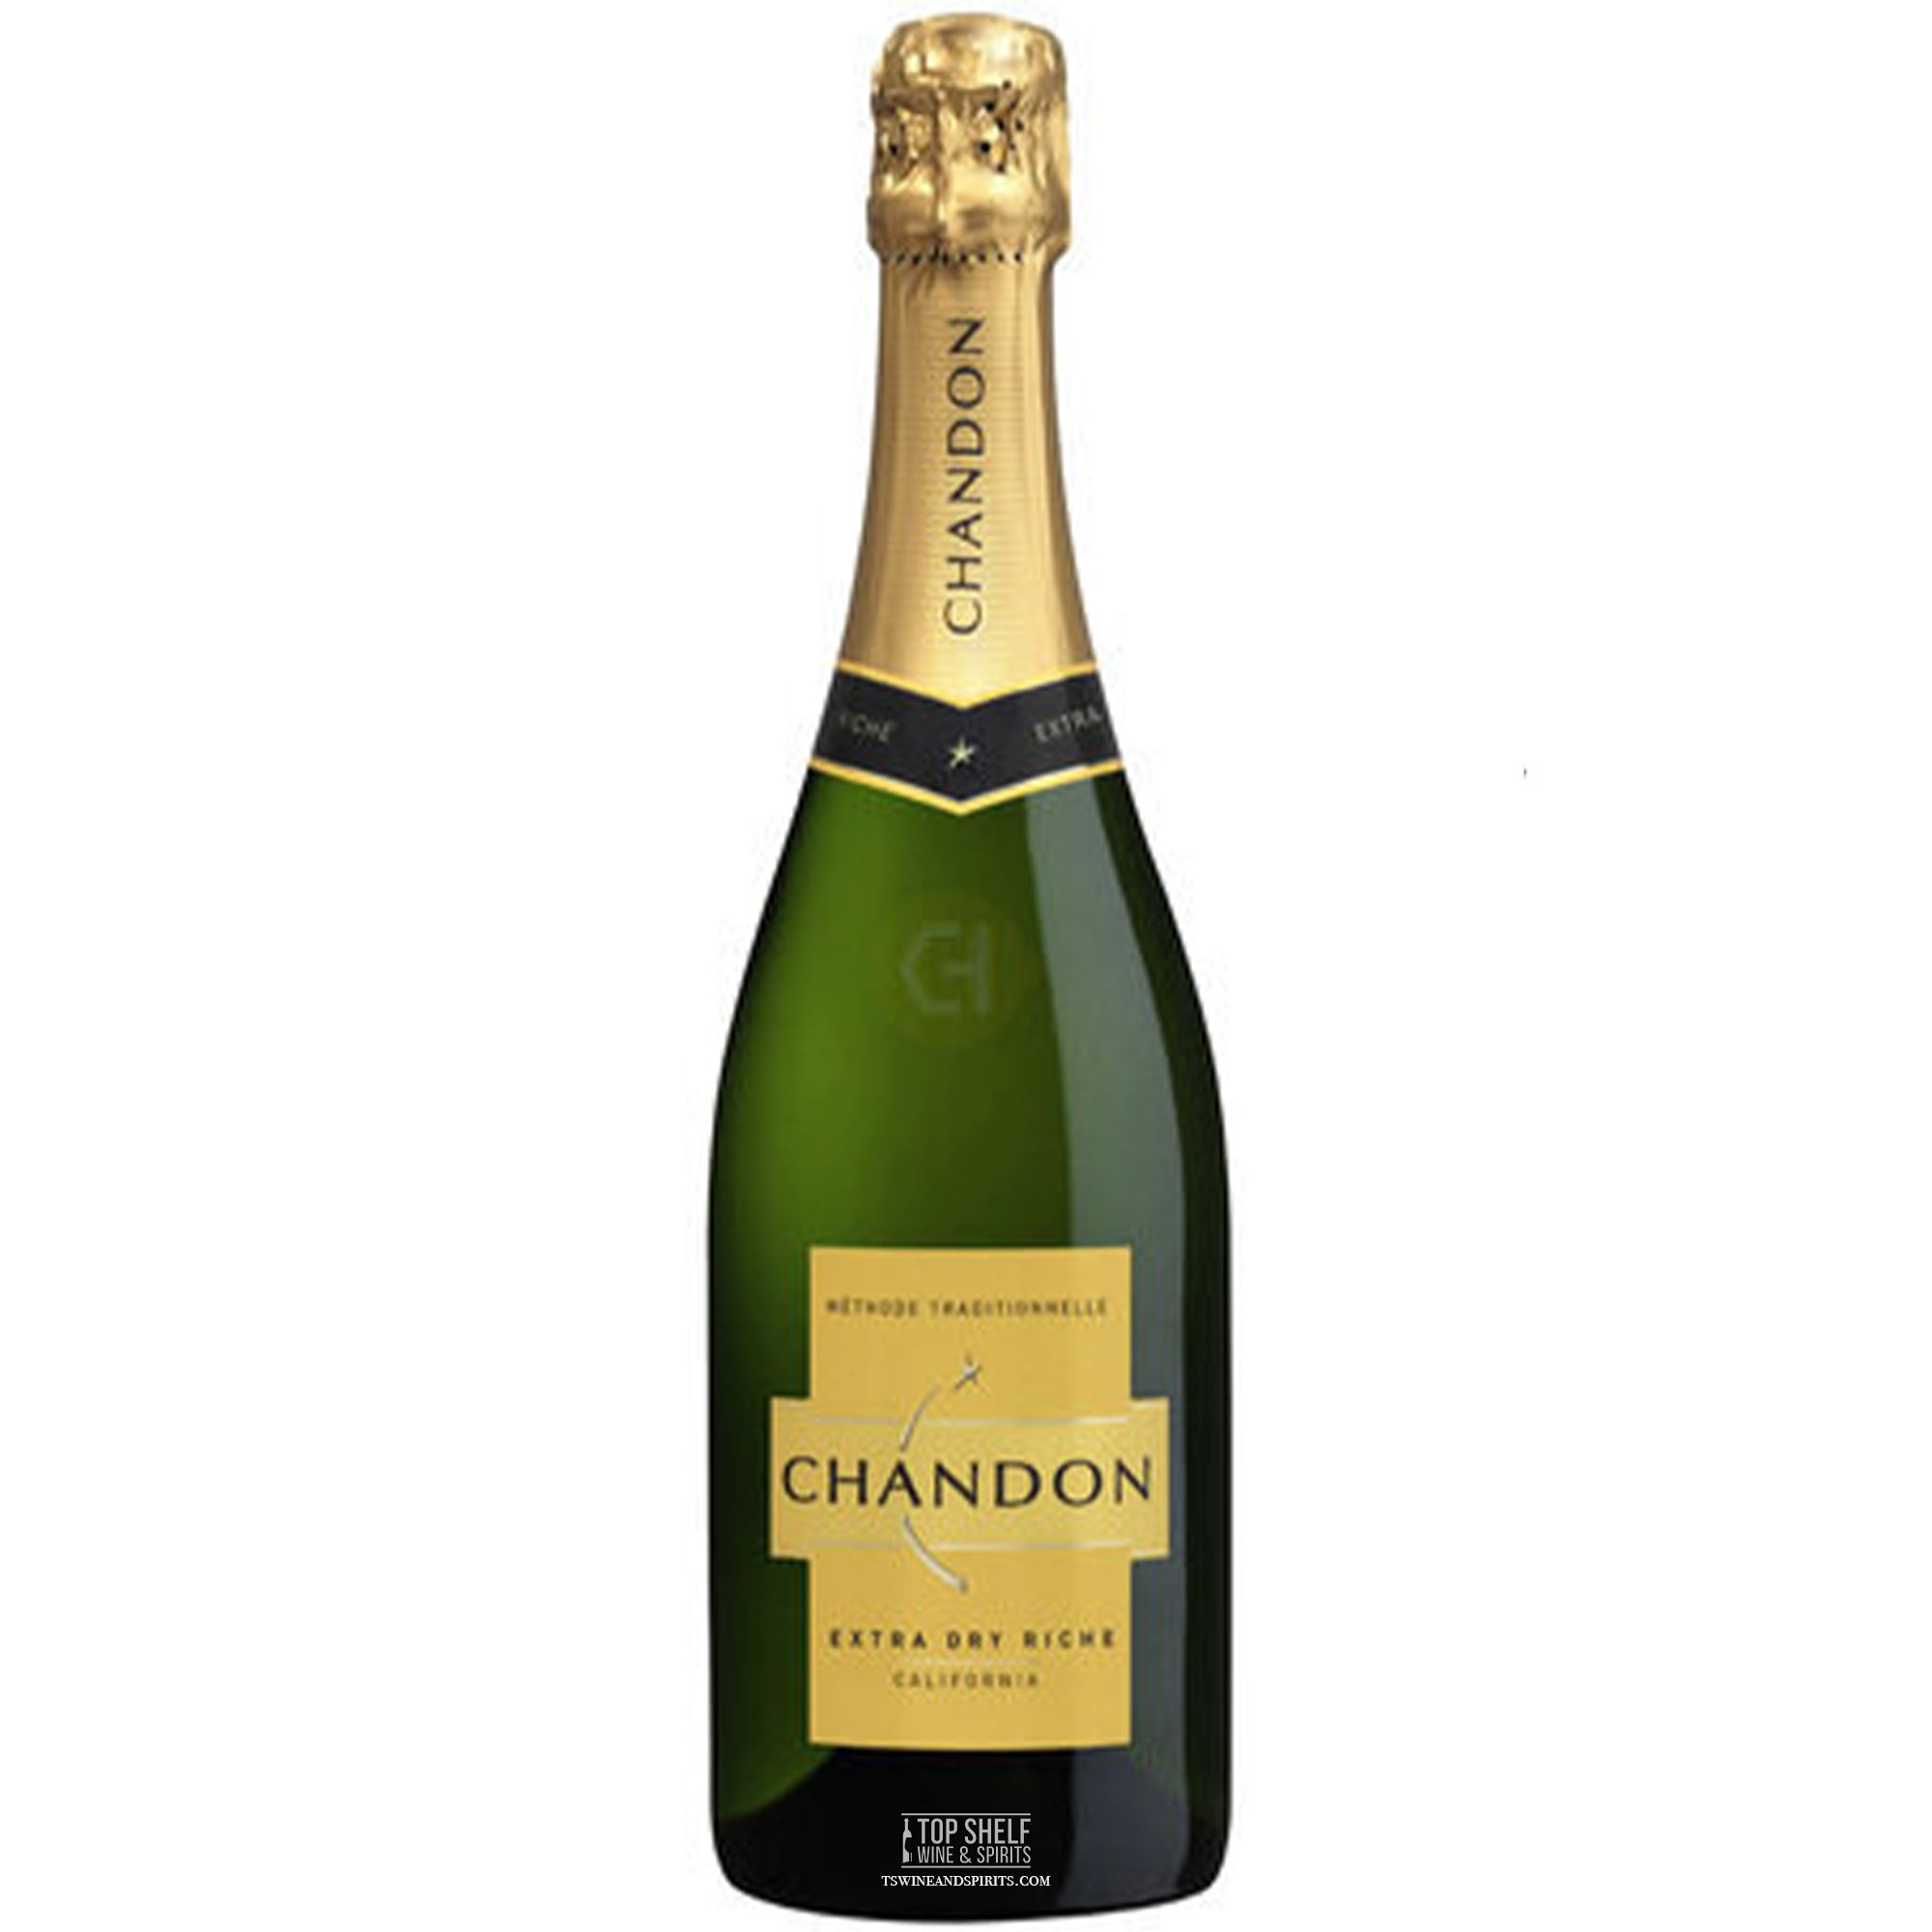 Domaine Chandon - The Real Review